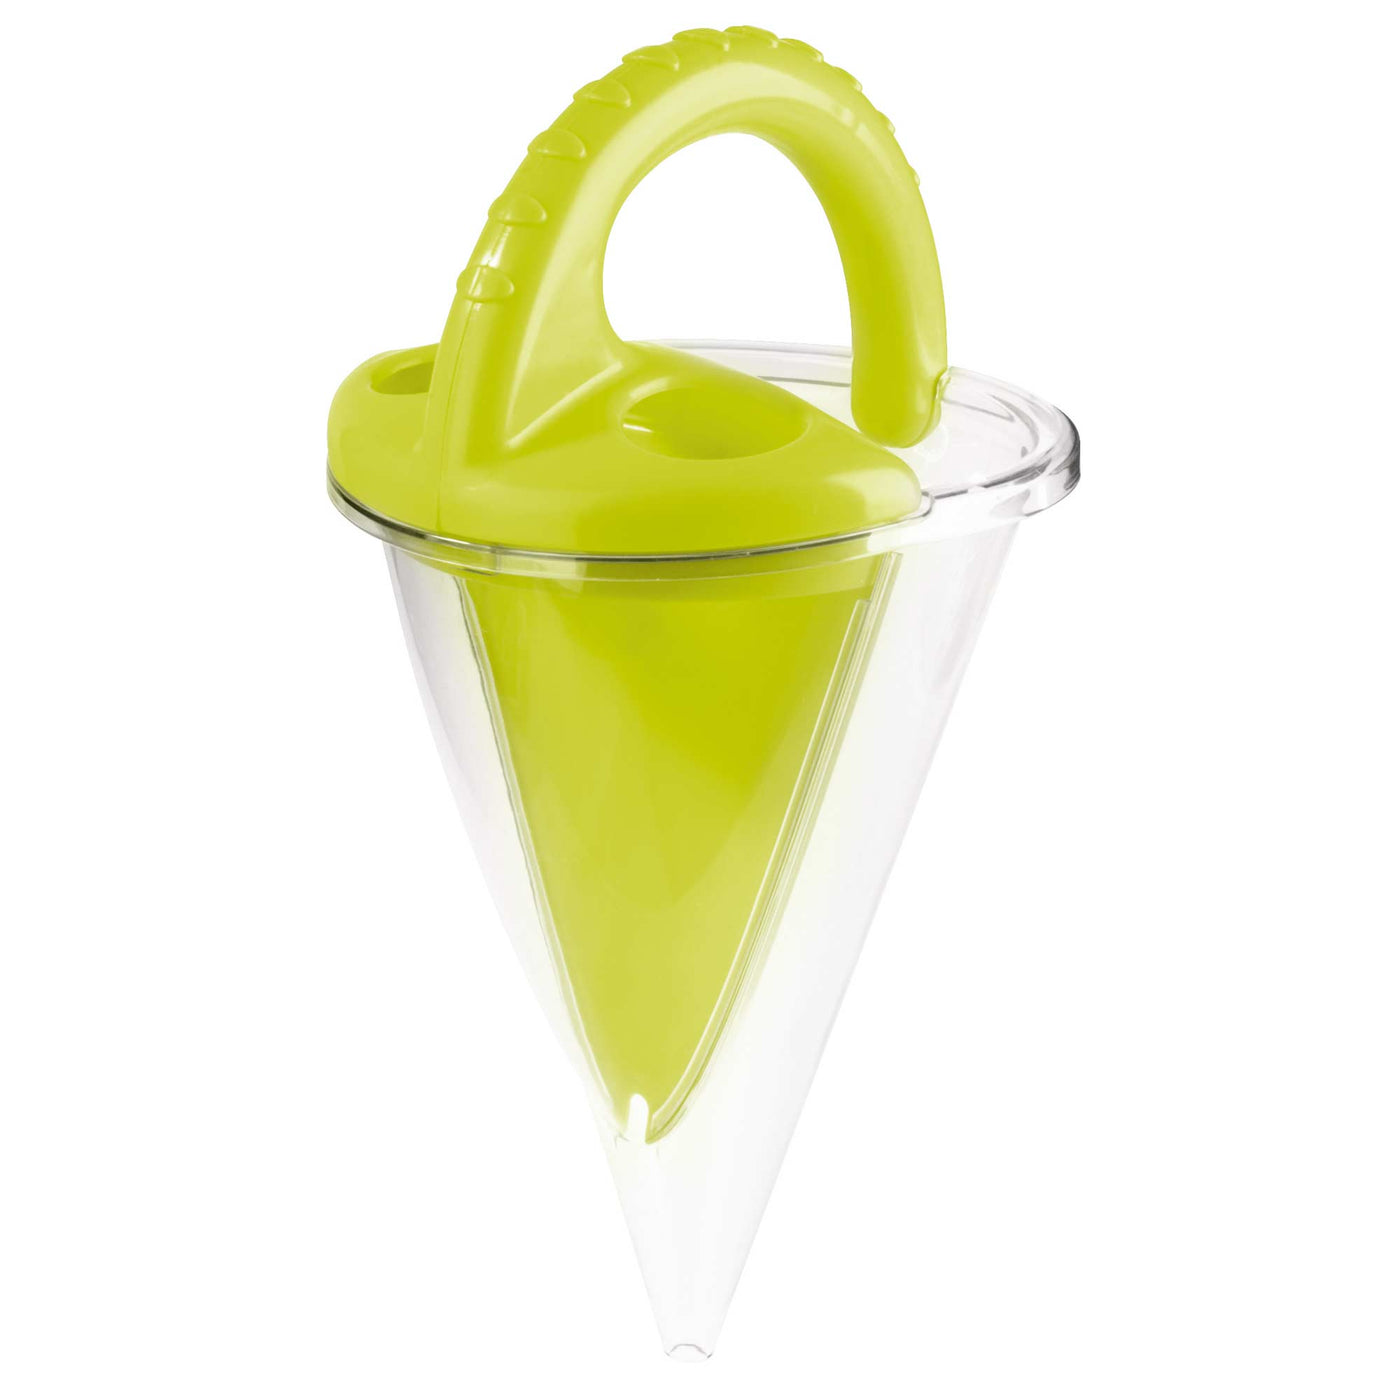 HABA Spilling Funnel Sand Toy